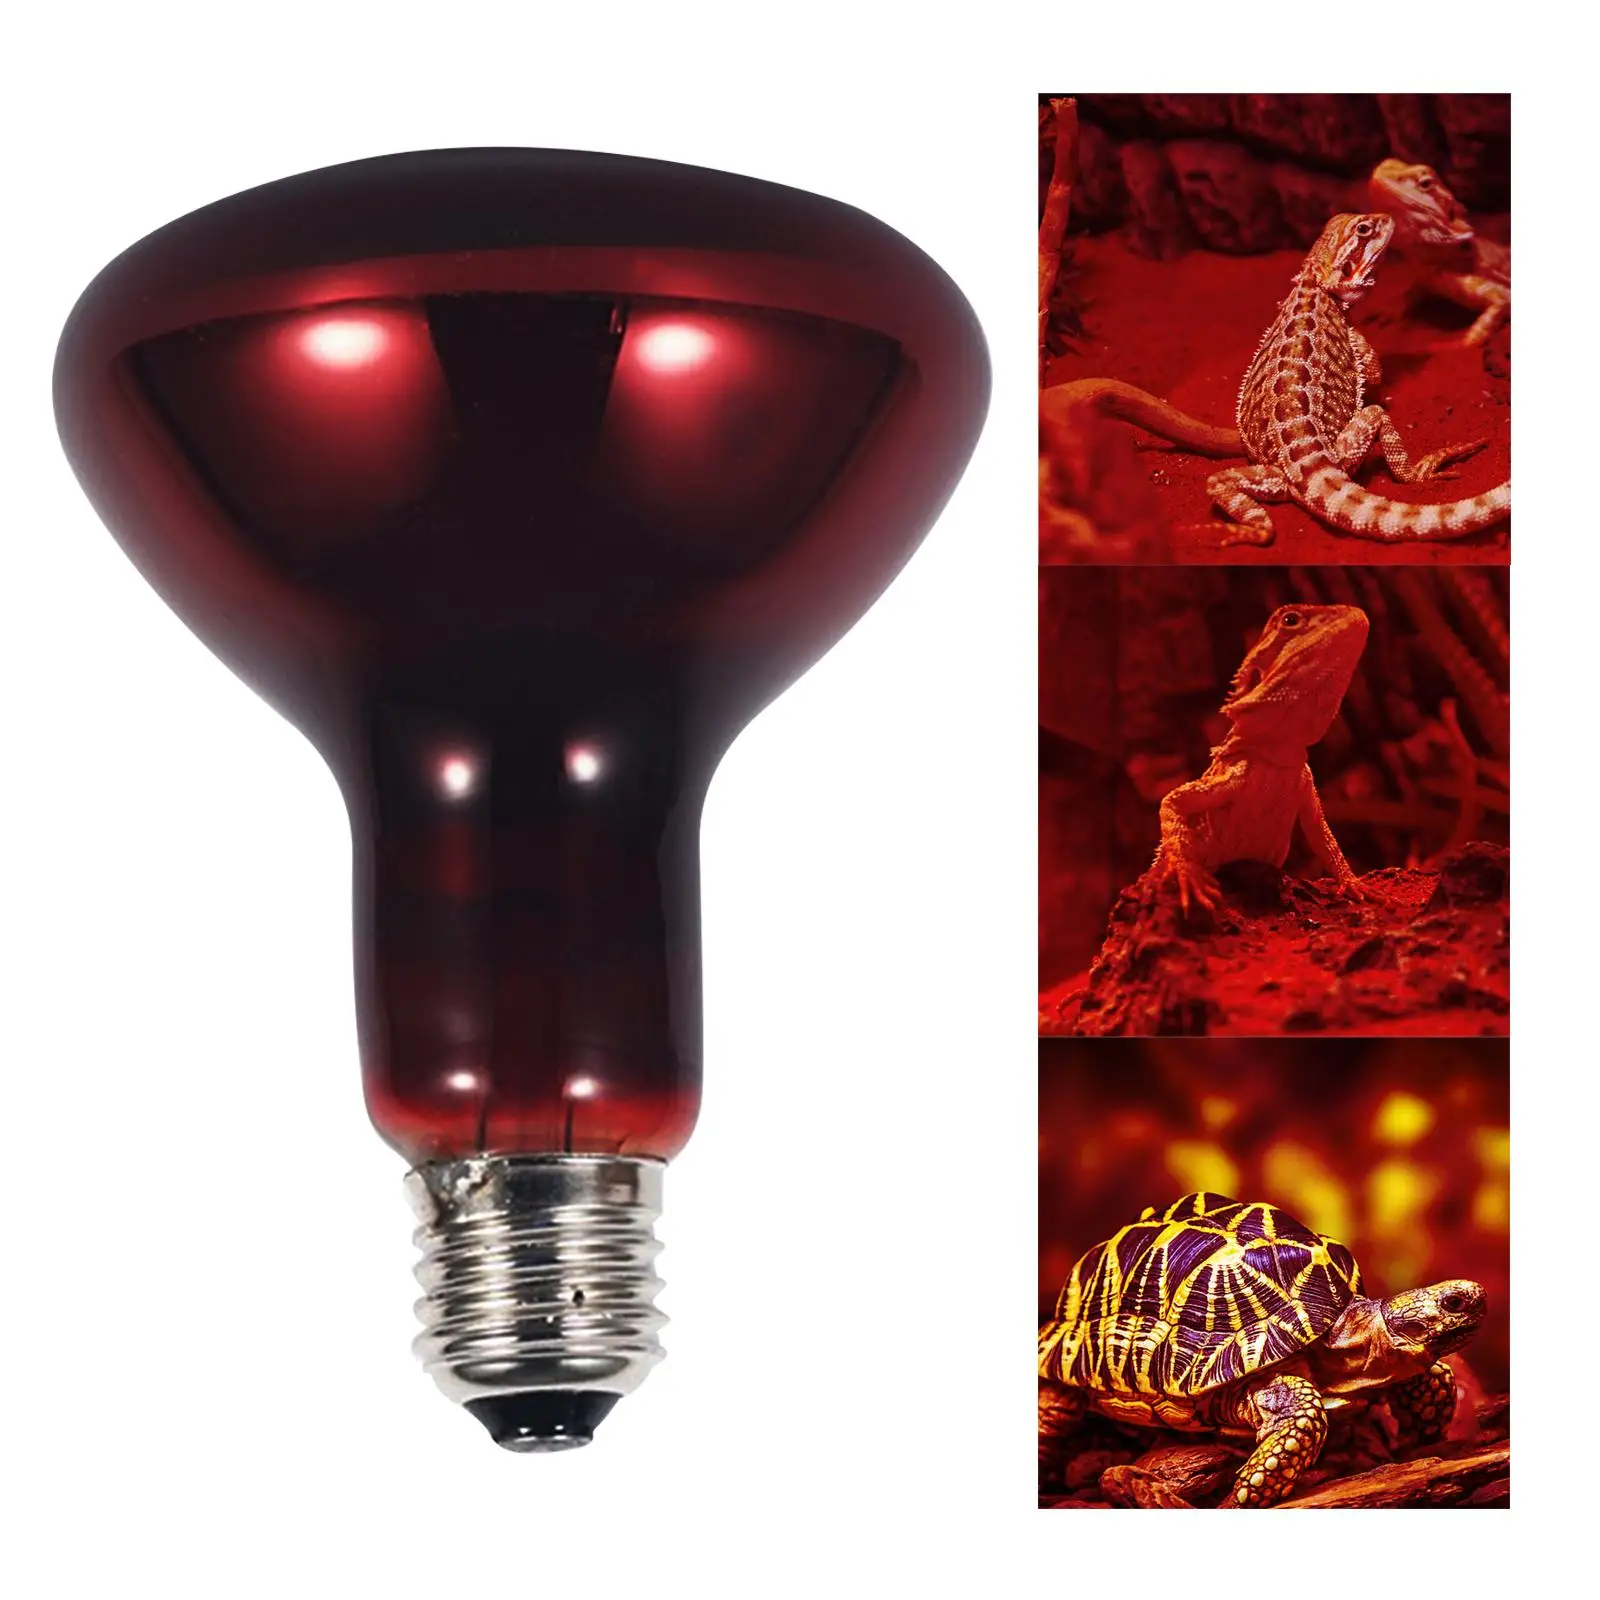 Red Reptile Light Bulb Pet Daylight 100W Infrared for Hedgehogs Amphibians